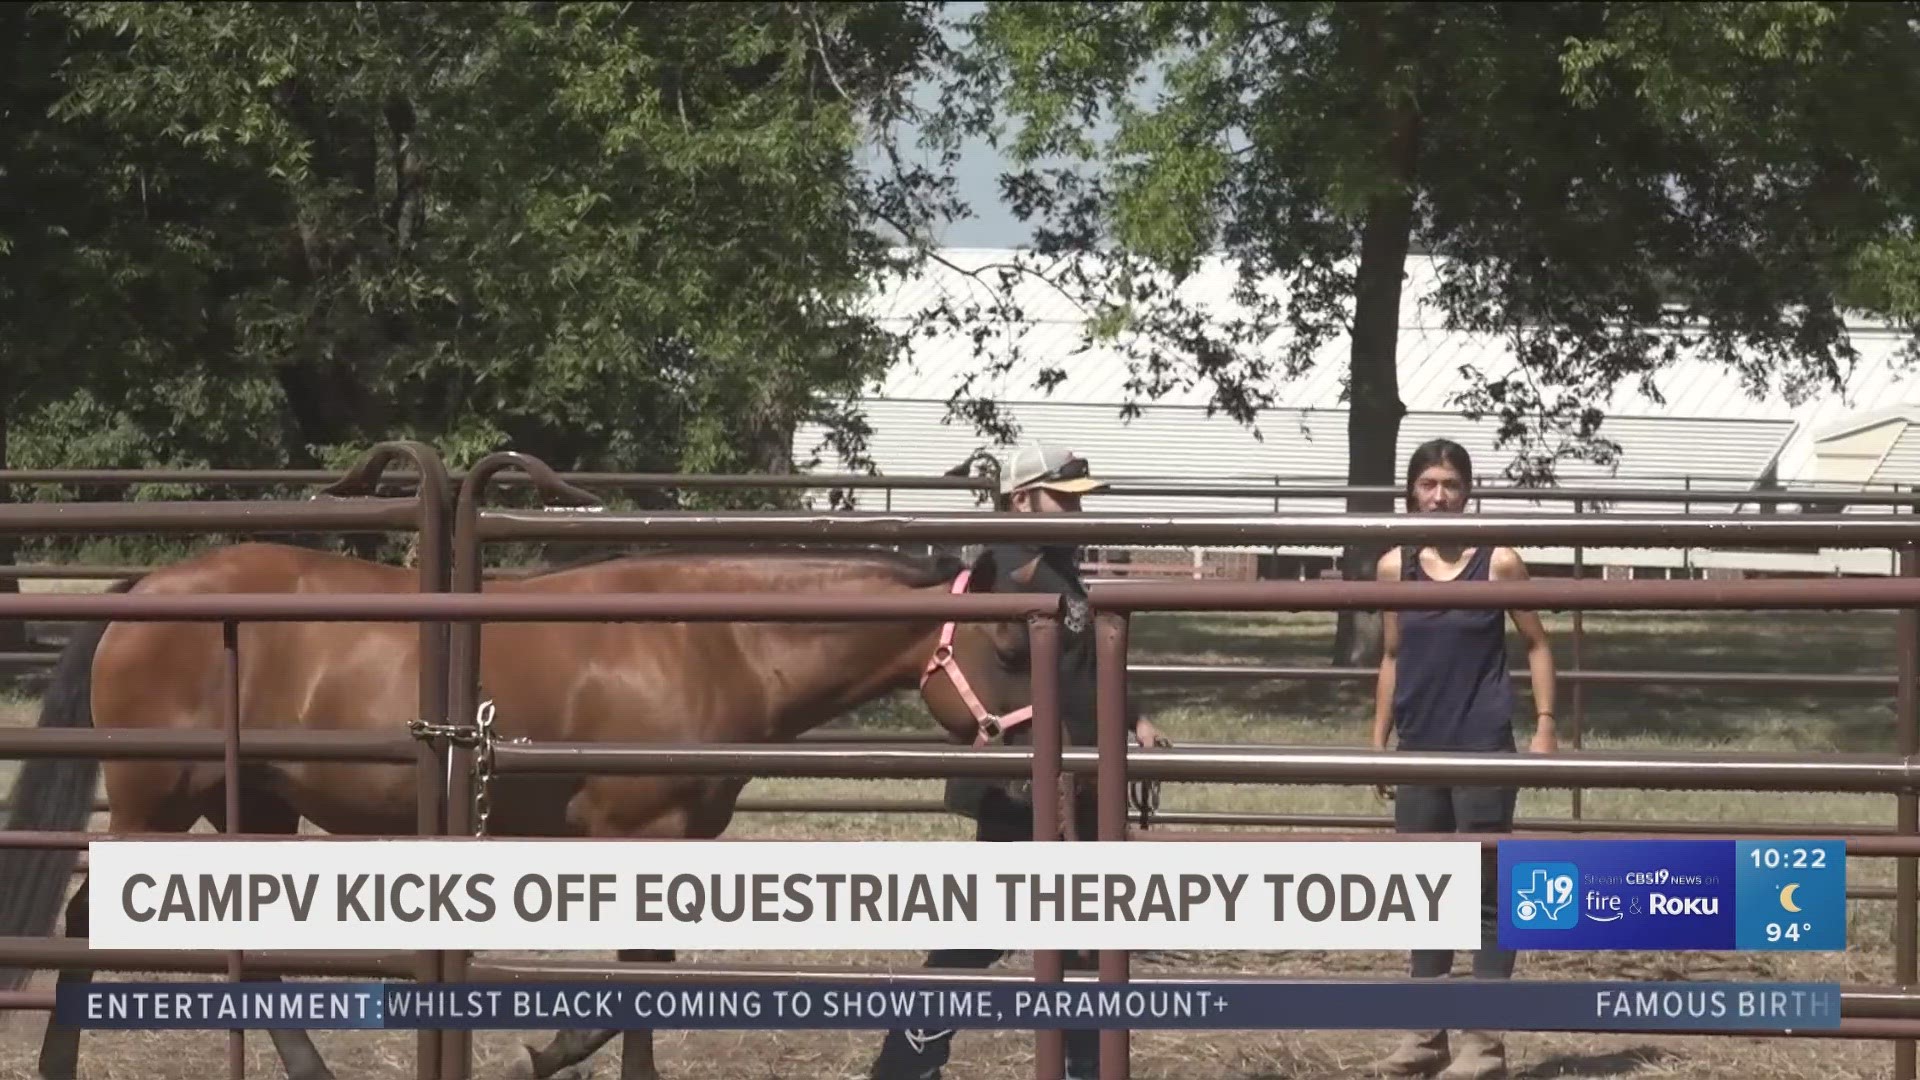 Starbrite teamed up with Camp V to provide equine assisted activities that can benefit local veterans.